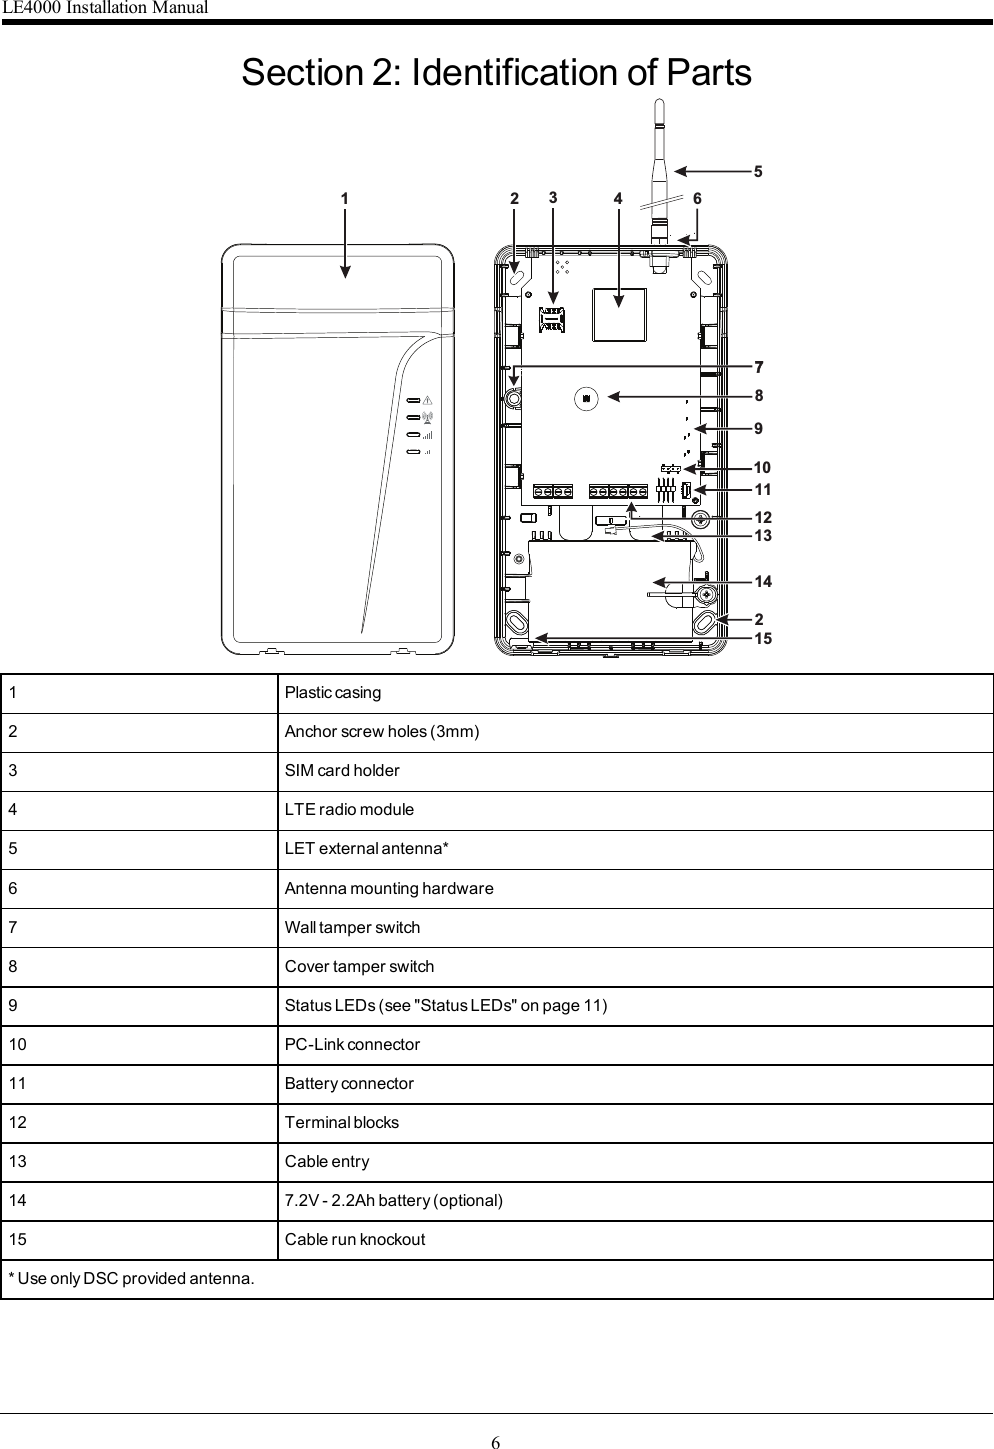 6Section 2: Identification of Parts25361413108291112151471 Plastic casing2 Anchor screw holes (3mm)3 SIM card holder4 LTE radio module5 LET external antenna*6 Antenna mounting hardware7 Wall tamper switch8 Cover tamper switch9 Status LEDs (see &quot;Status LEDs&quot; on page 11)10 PC-Link connector11 Battery connector12 Terminal blocks13 Cable entry14 7.2V - 2.2Ah battery (optional)15 Cable run knockout* Use only DSC provided antenna.LE4000 Installation Manual